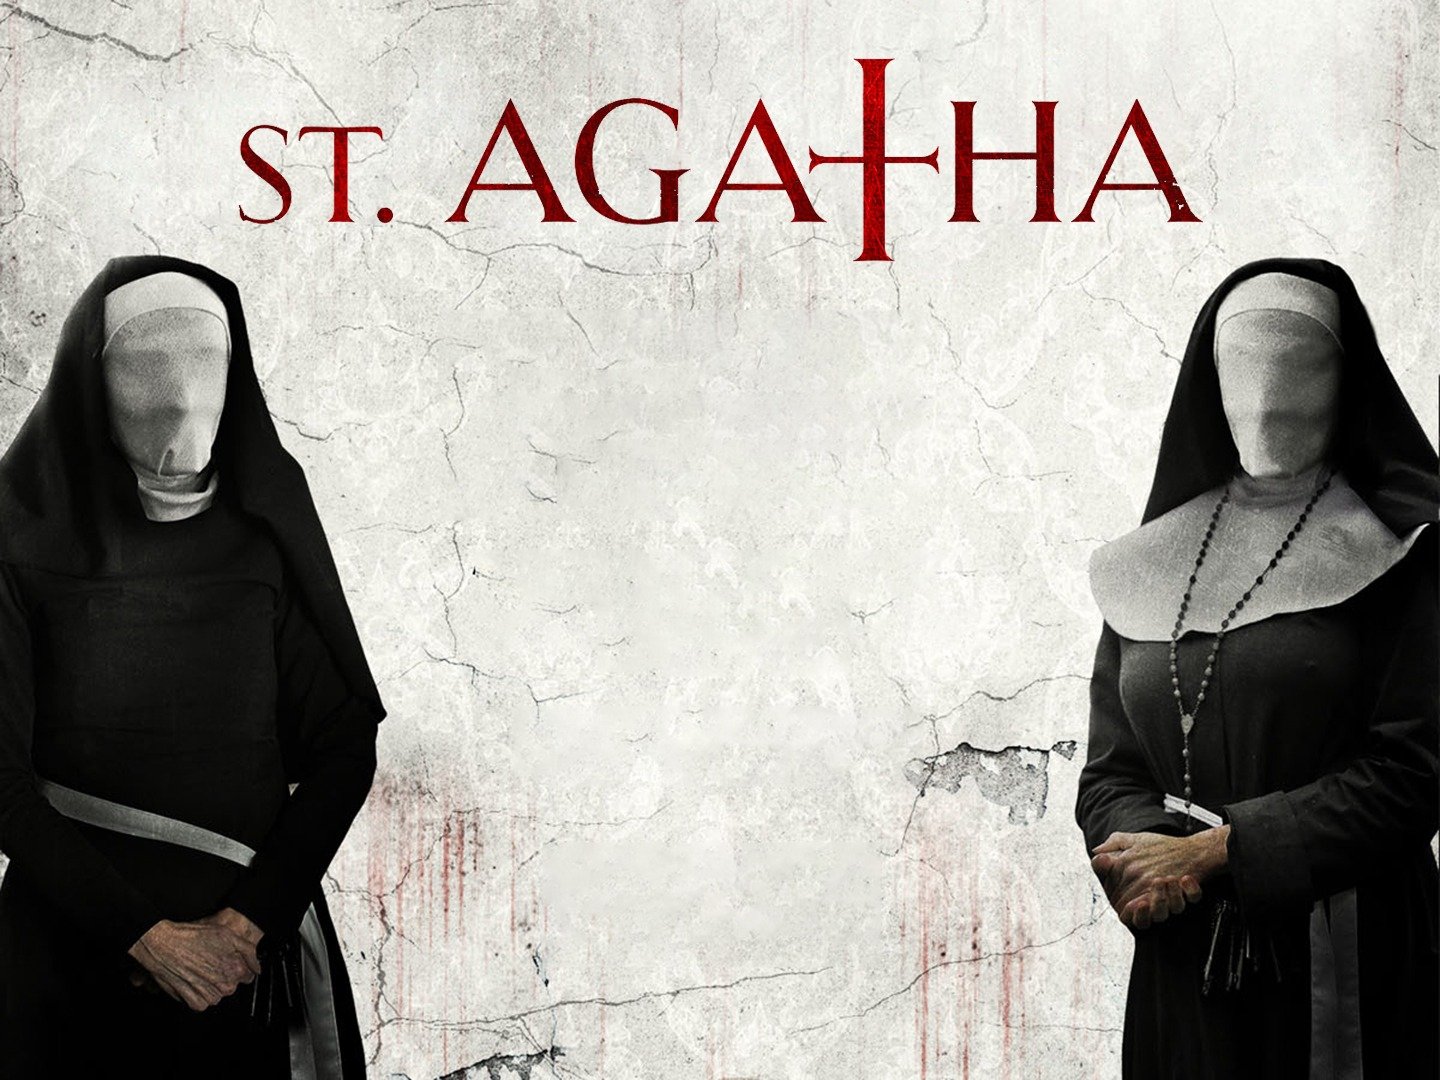 St. Agatha 2018 Movie Poster Wallpapers